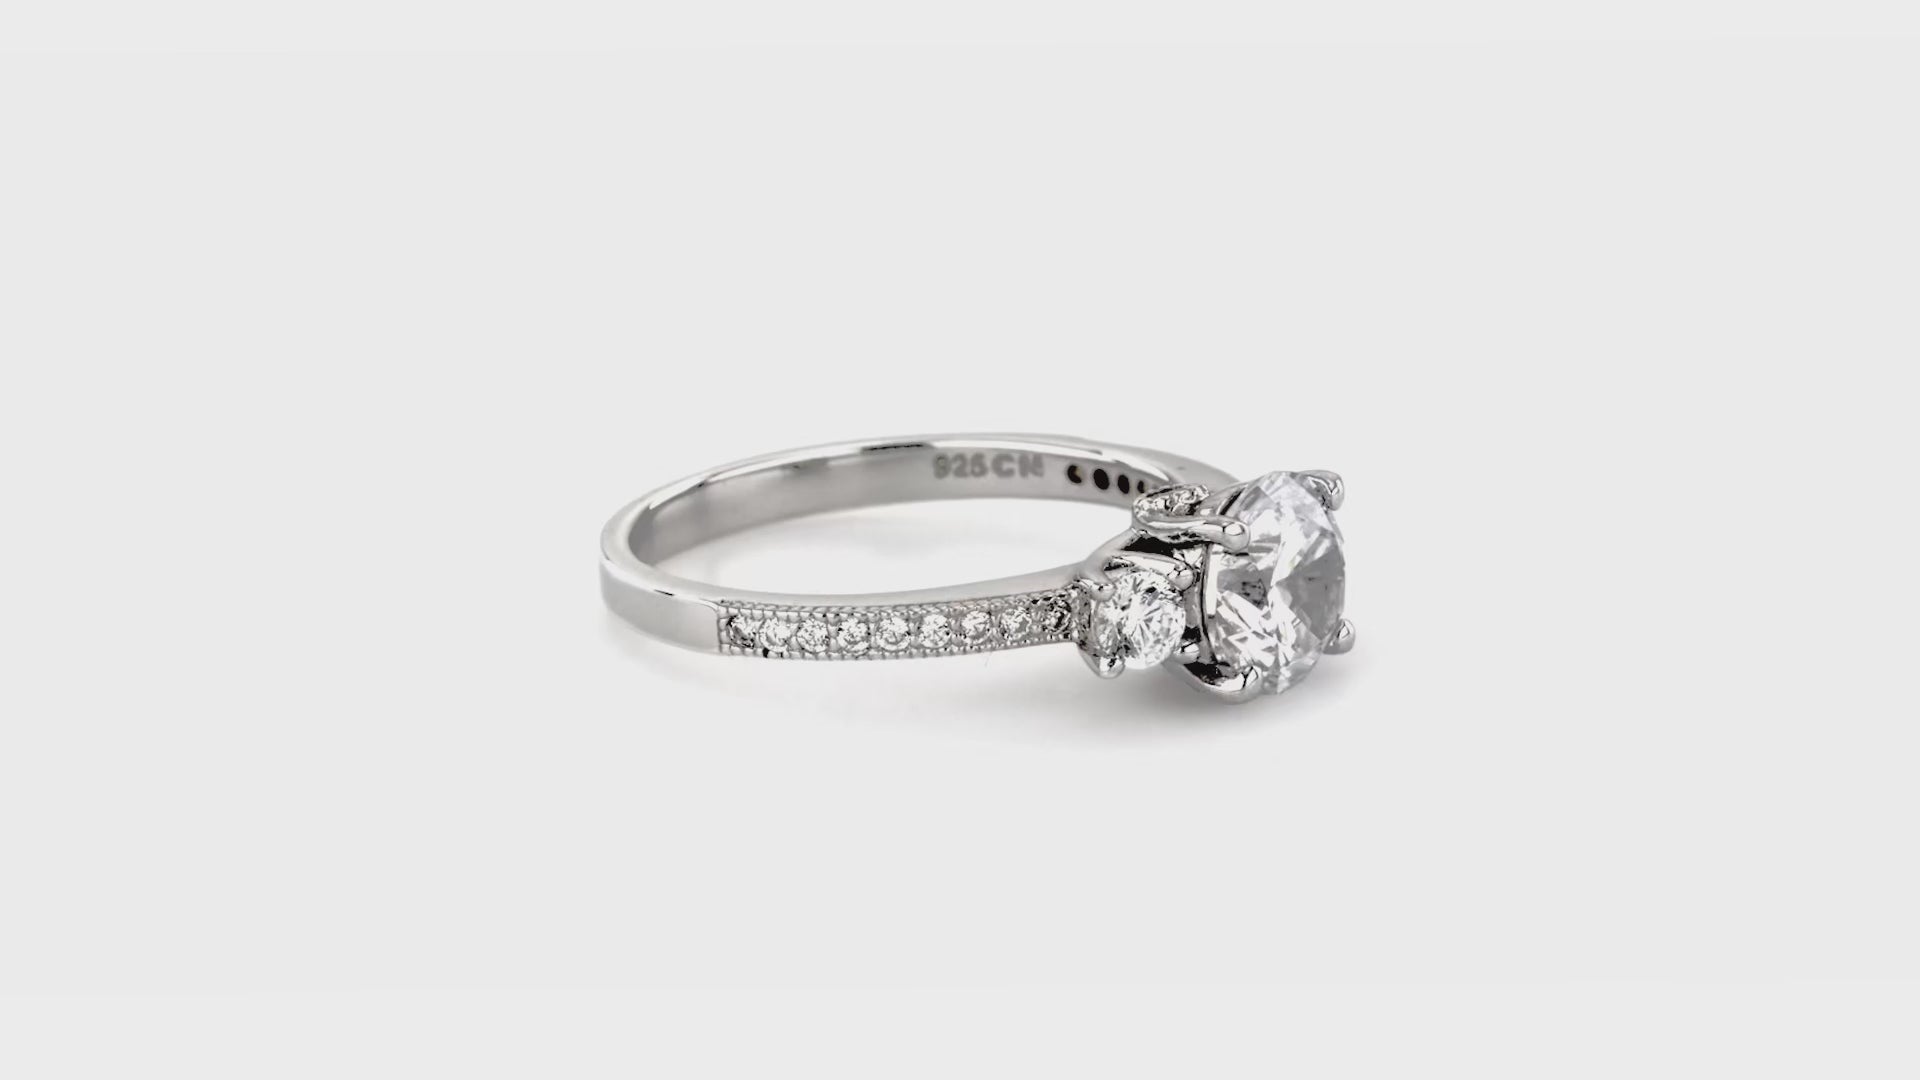 Video Contains 3-Stone Round CZ Ring Set in Sterling Silver. Style Number R537-02